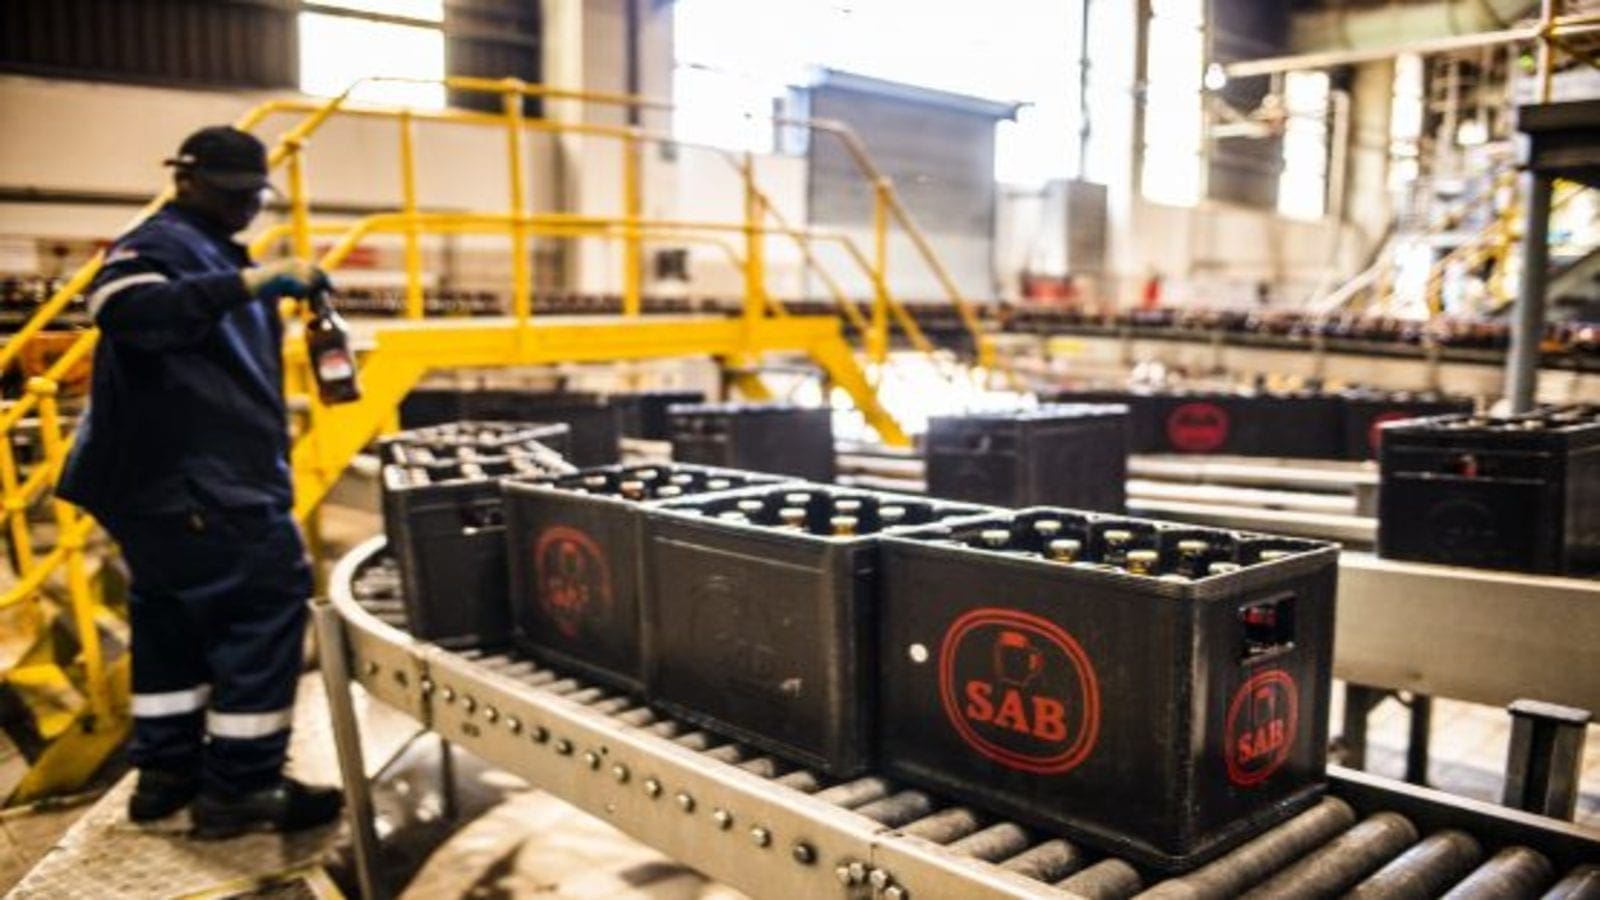 South African Breweries suspends contracts of 550 temporary workers as booze ban continues